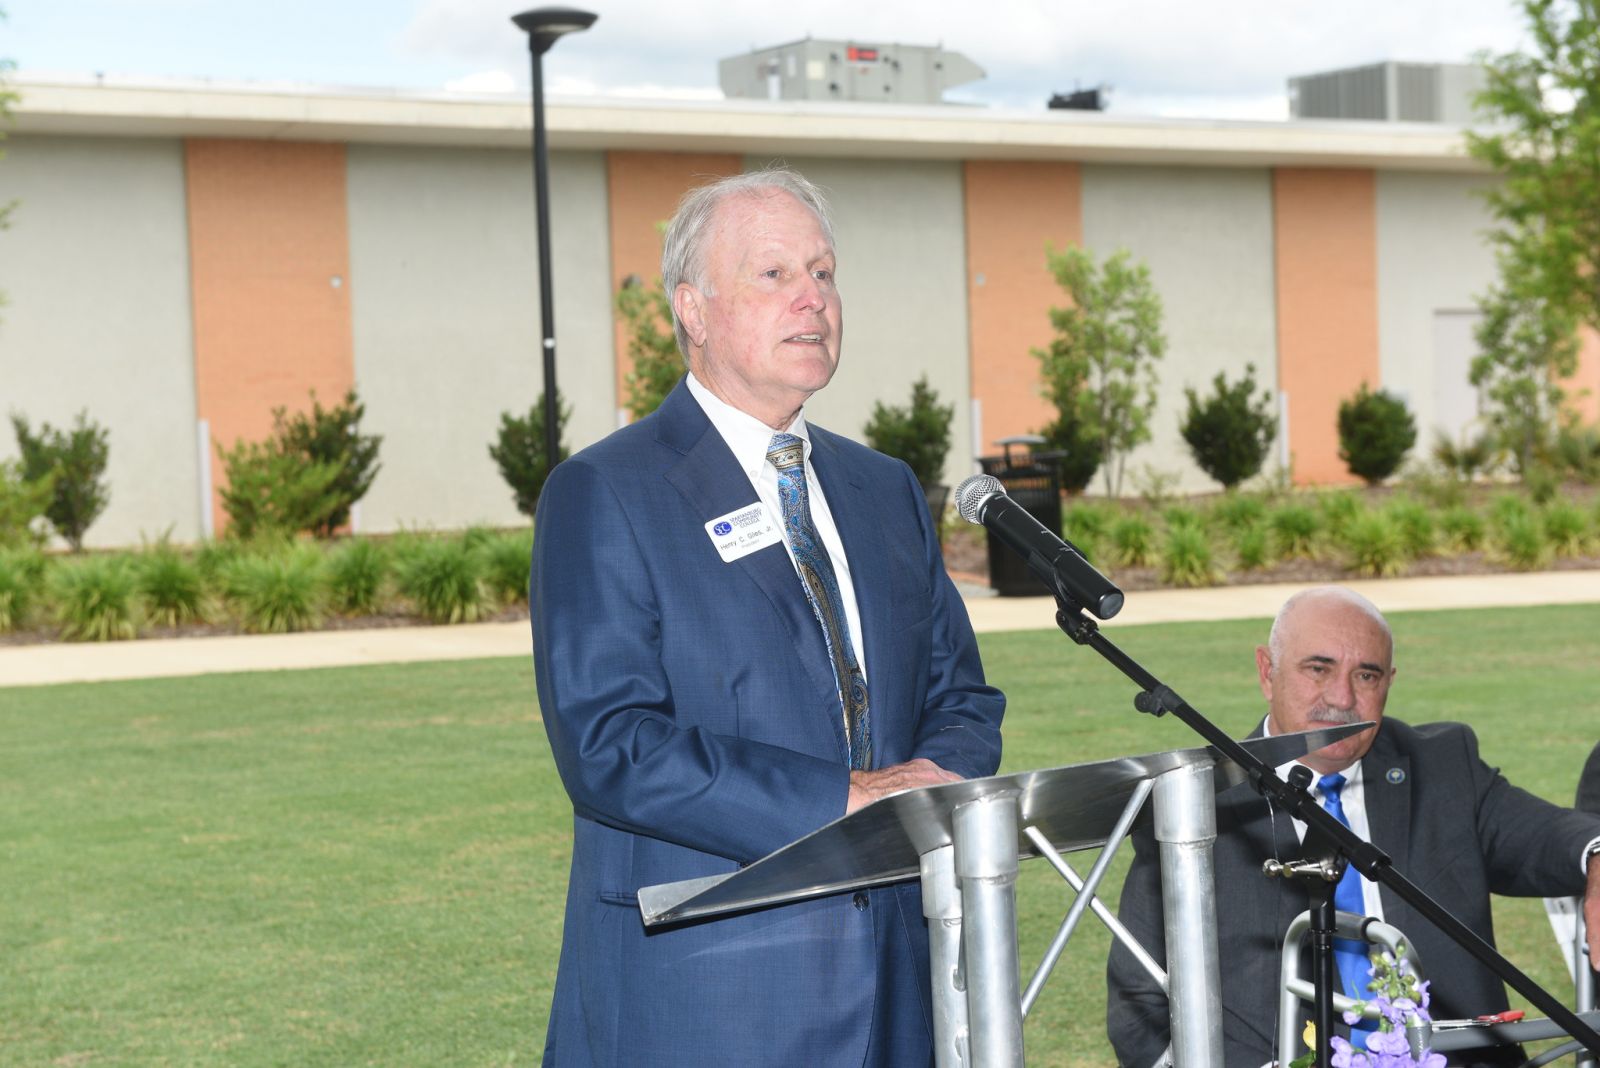 Henry Giles, with S.C. Technical College System President Tim Hardee, thanked the faculty, staff and other players who have worked together to make Spartanburg Community College a success. (Photo/Provided) 